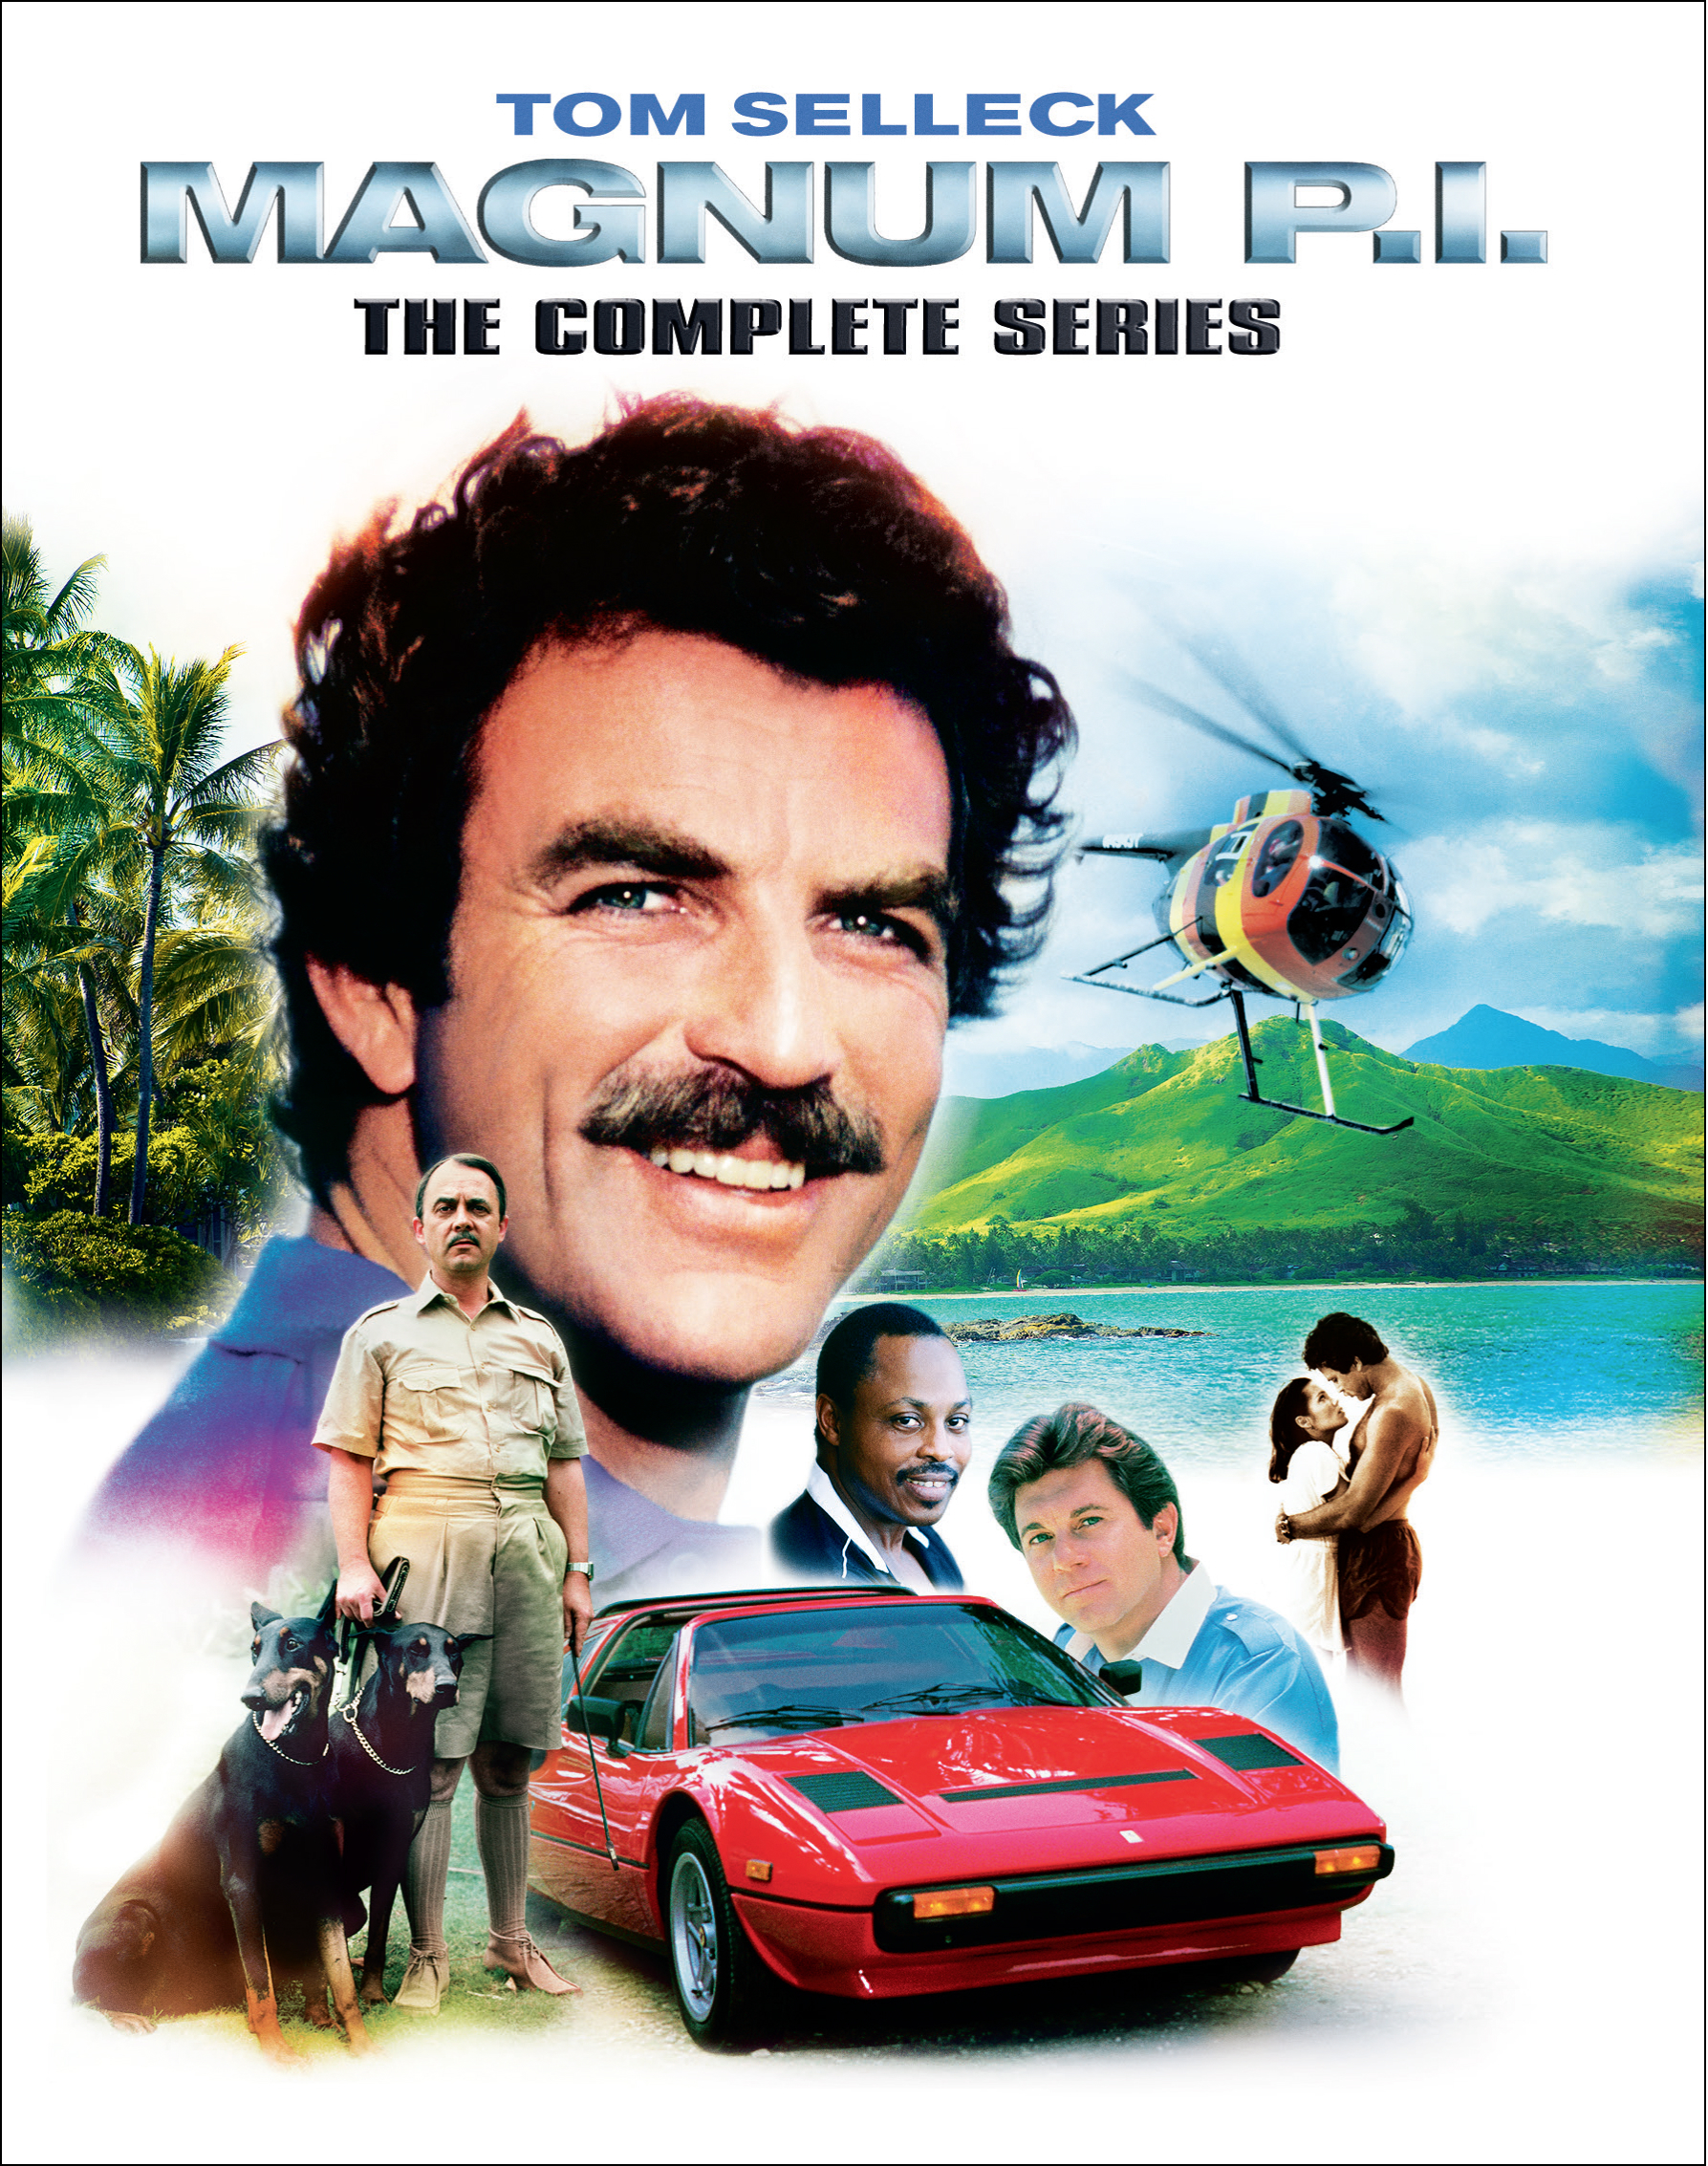 Magnum P.I.: The Complete Series - DVD   - Drama Television On DVD - TV Shows On GRUV